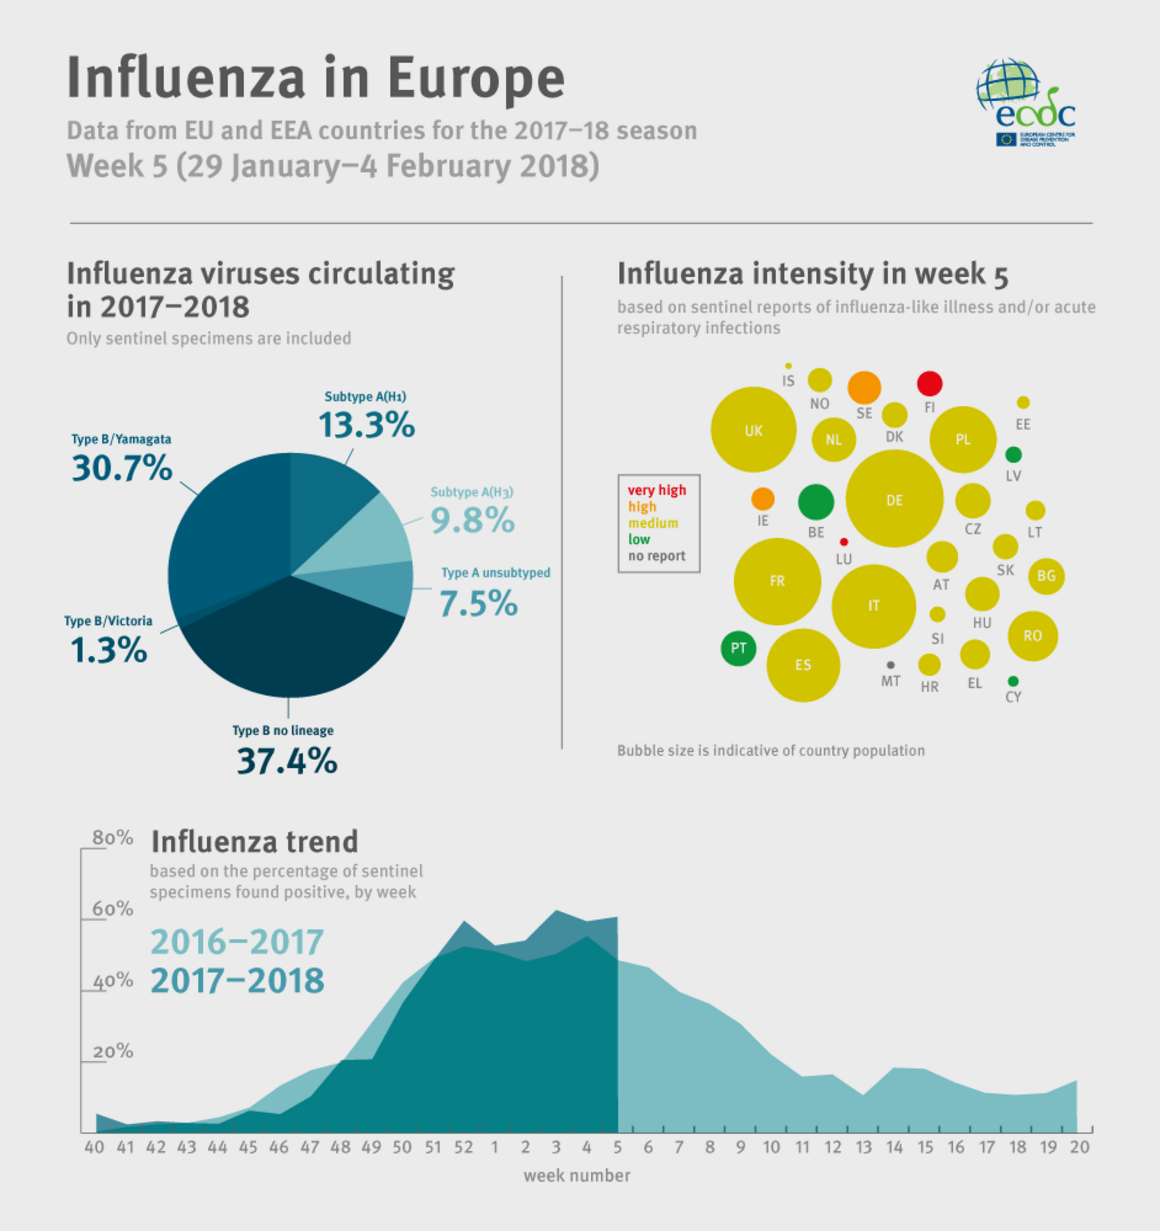 The visual is showing surveillance data for influenza, week 5, 2018